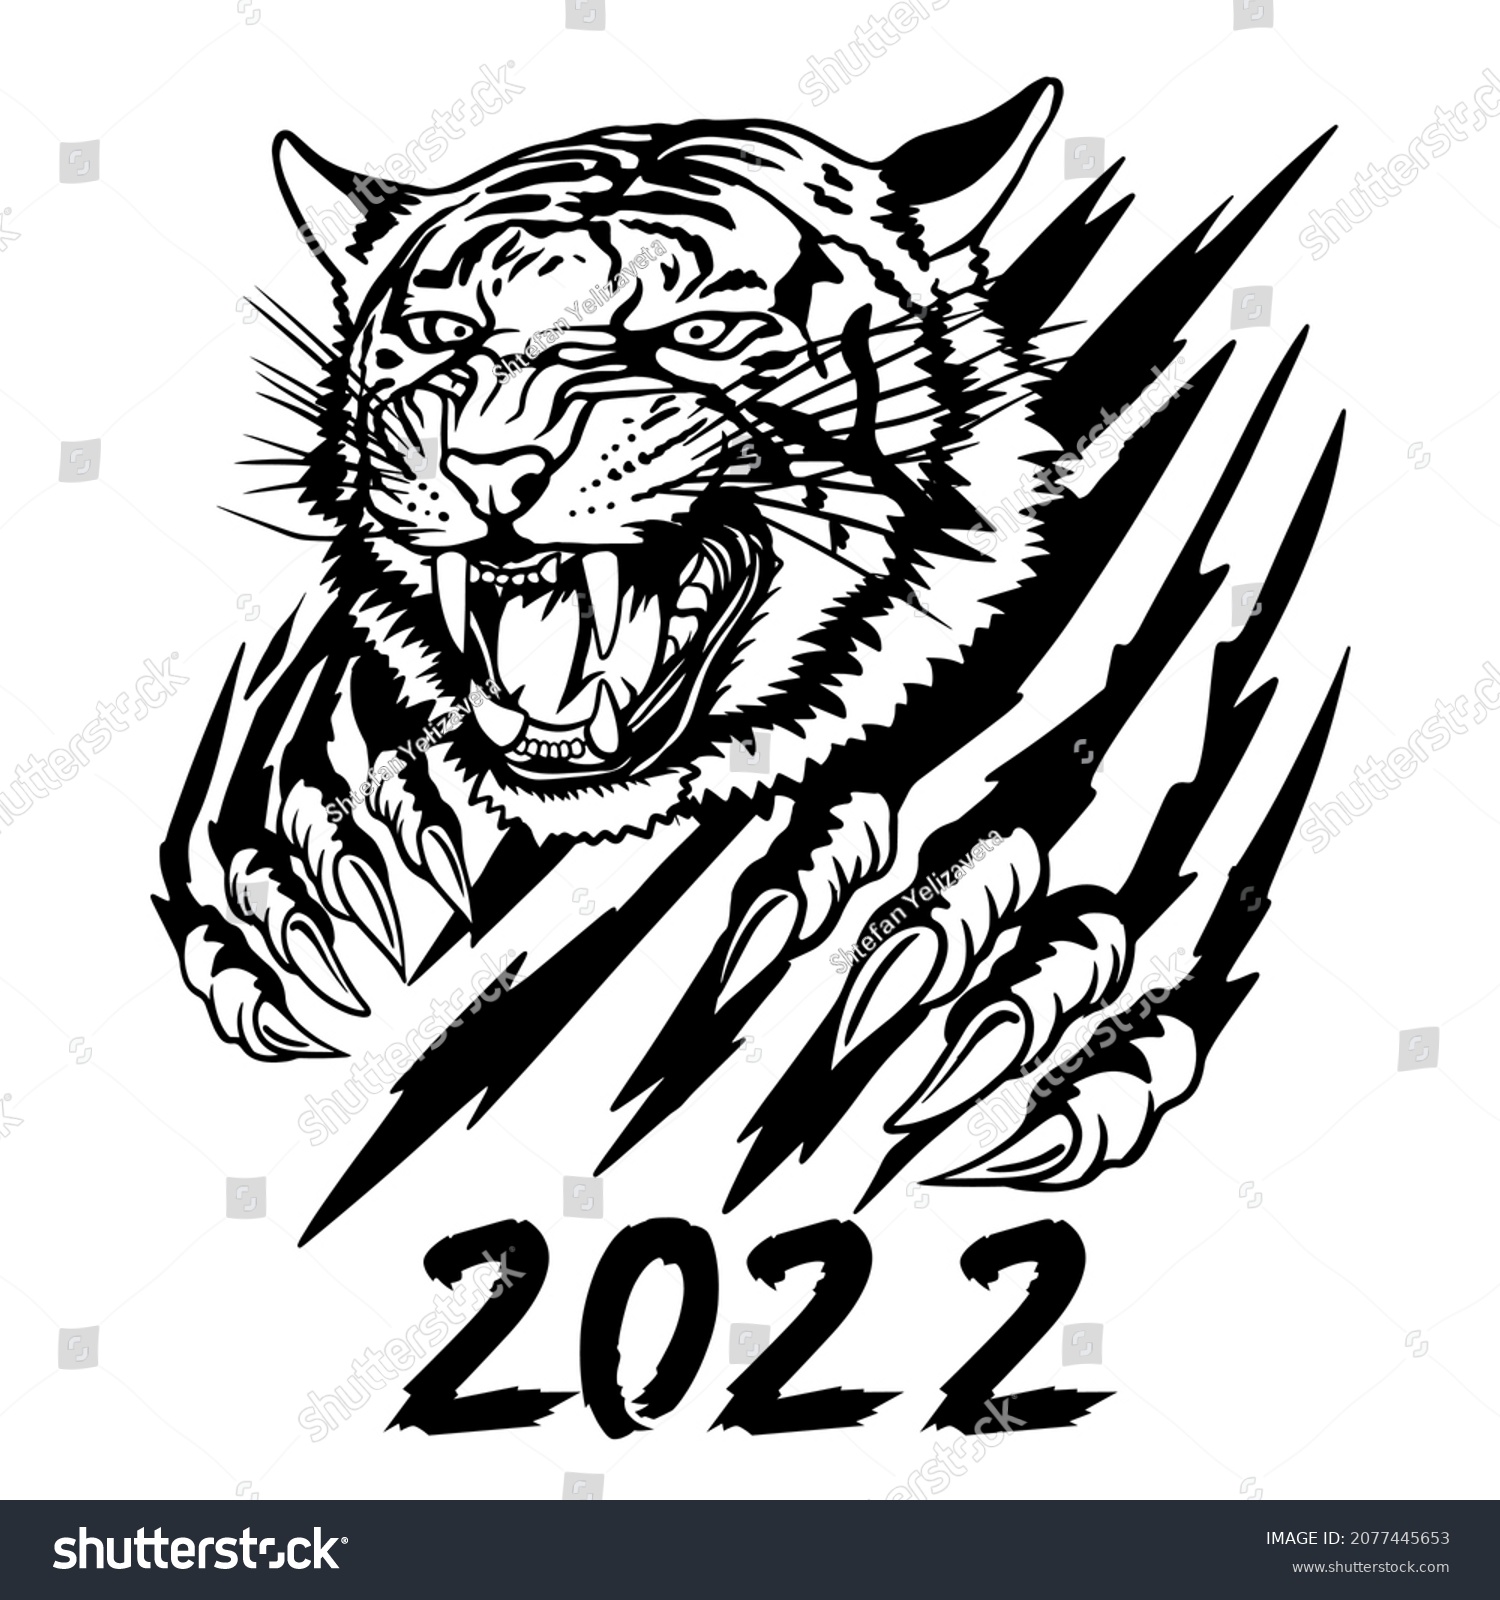 SVG of Tiger svg clipart. New Year of the Tiger 2022. Freehand drawing of a tiger. Greeting card, poster, illustration for printing on T-shirts, textiles and souvenirs. svg